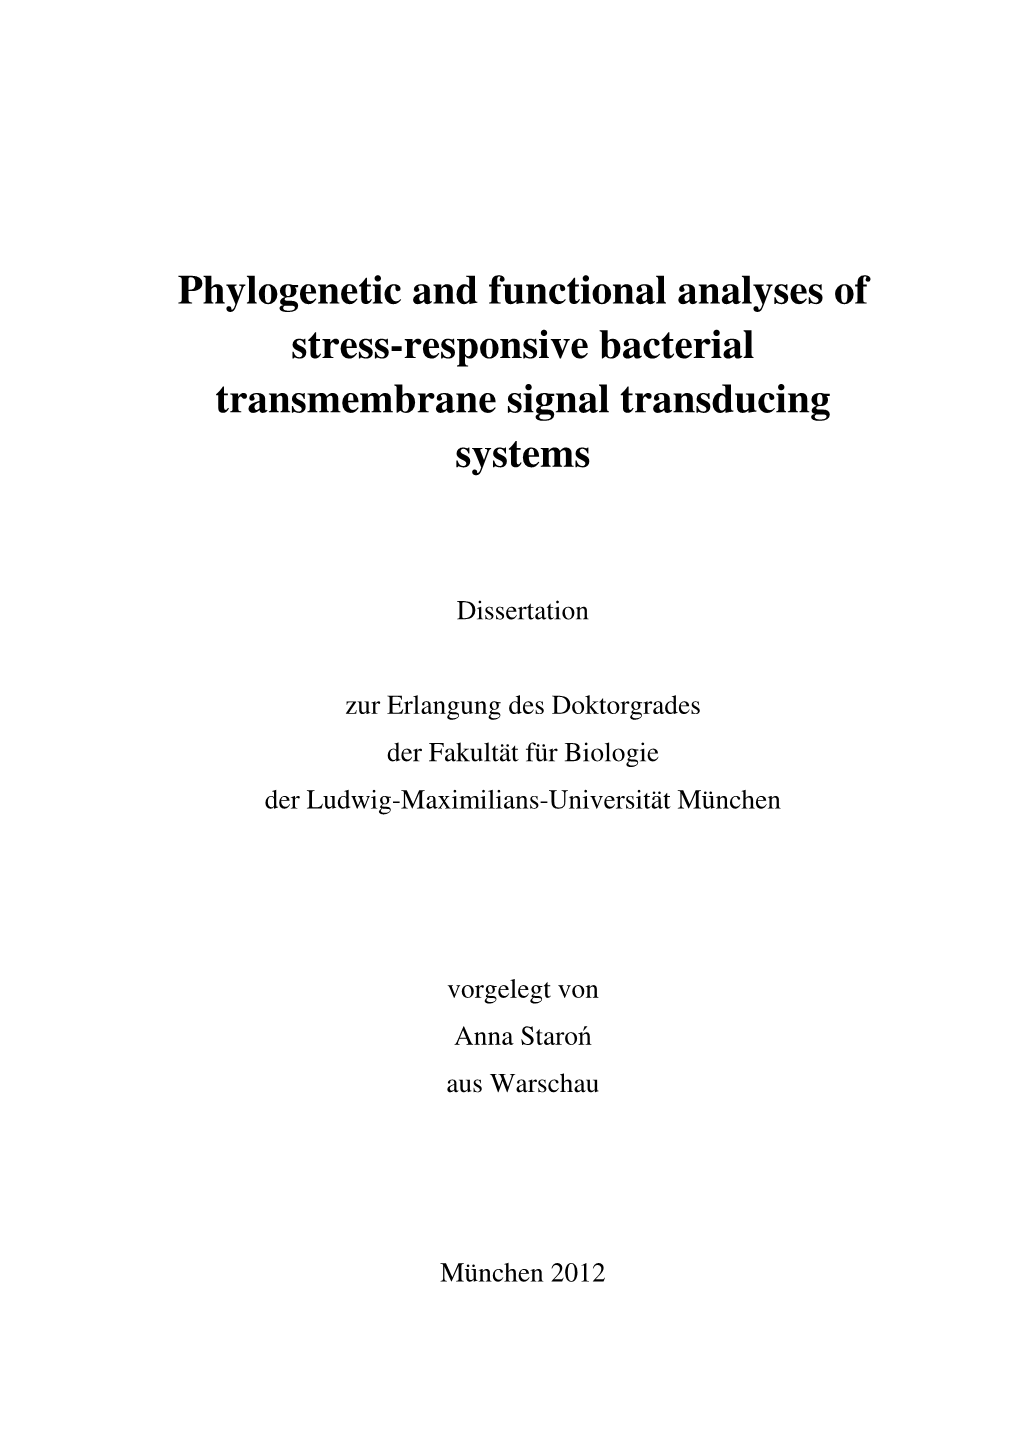 Phylogenetic and Functional Analyses of Stress-Responsive Bacterial Transmembrane Signal Transducing Systems